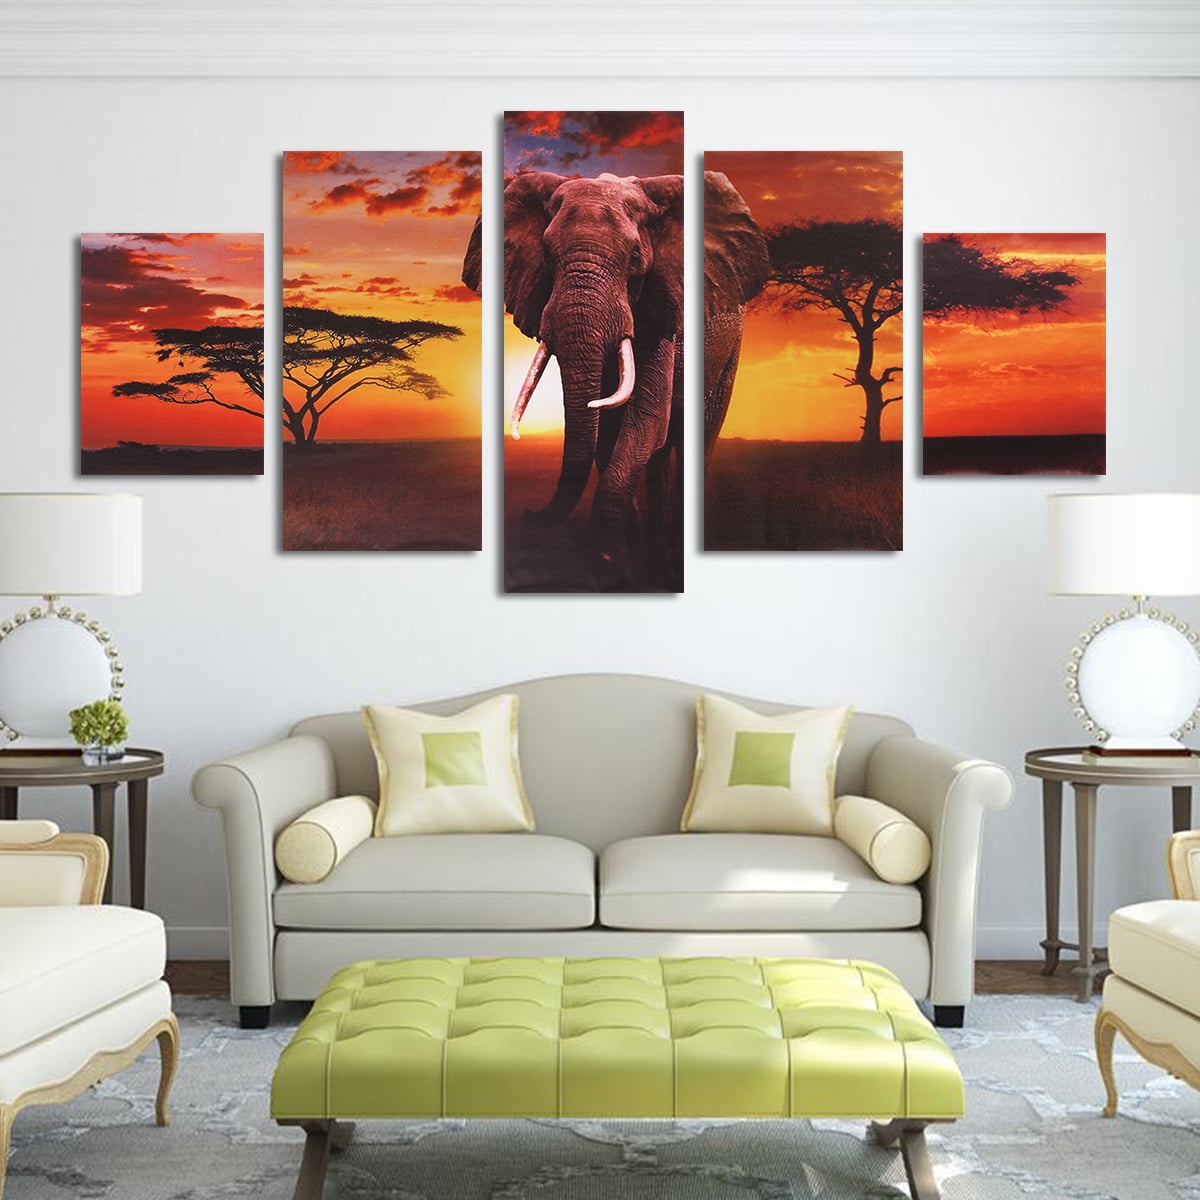 Unframed HD Canvas Prints Home Decor Wall Art Painting Picture-Elephants Best